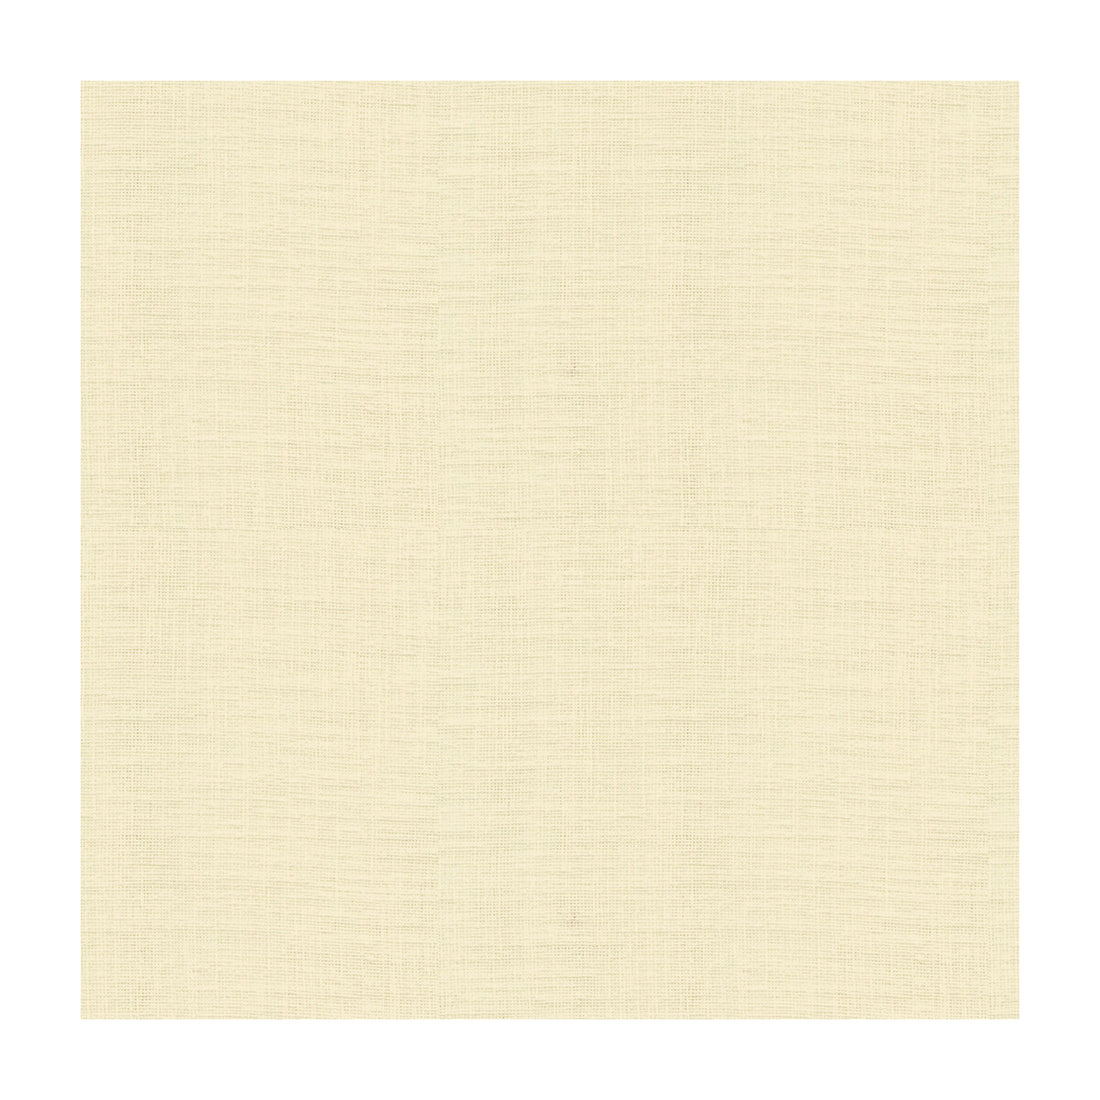 Kravet Contract fabric in 4153-111 color - pattern 4153.111.0 - by Kravet Contract